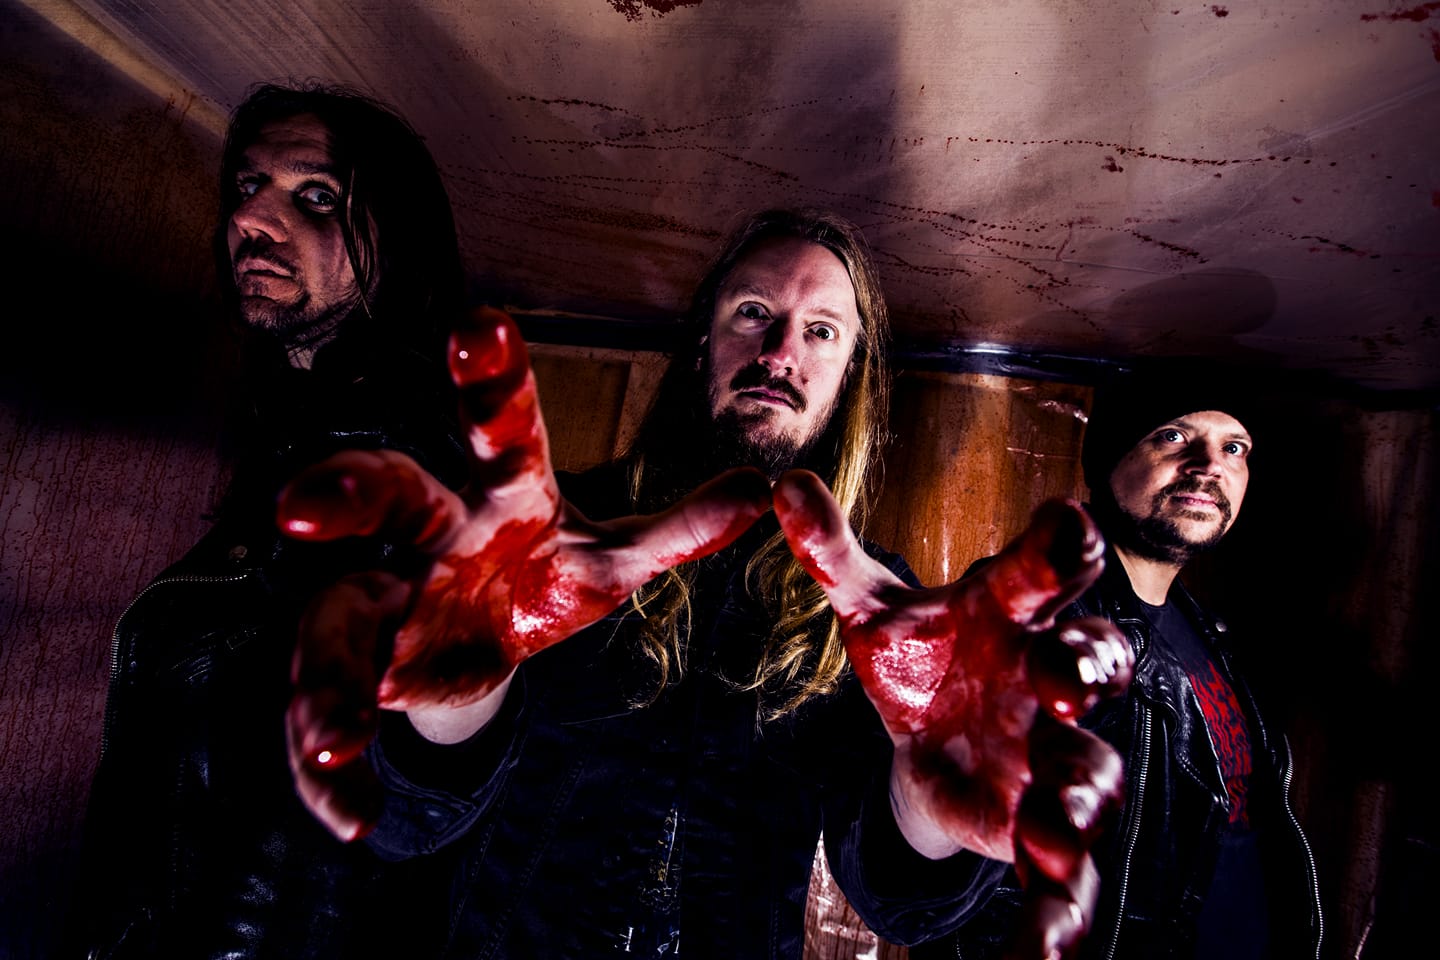 Lik carry the torch of Swedish Death Metal – and deserve more attention for it!